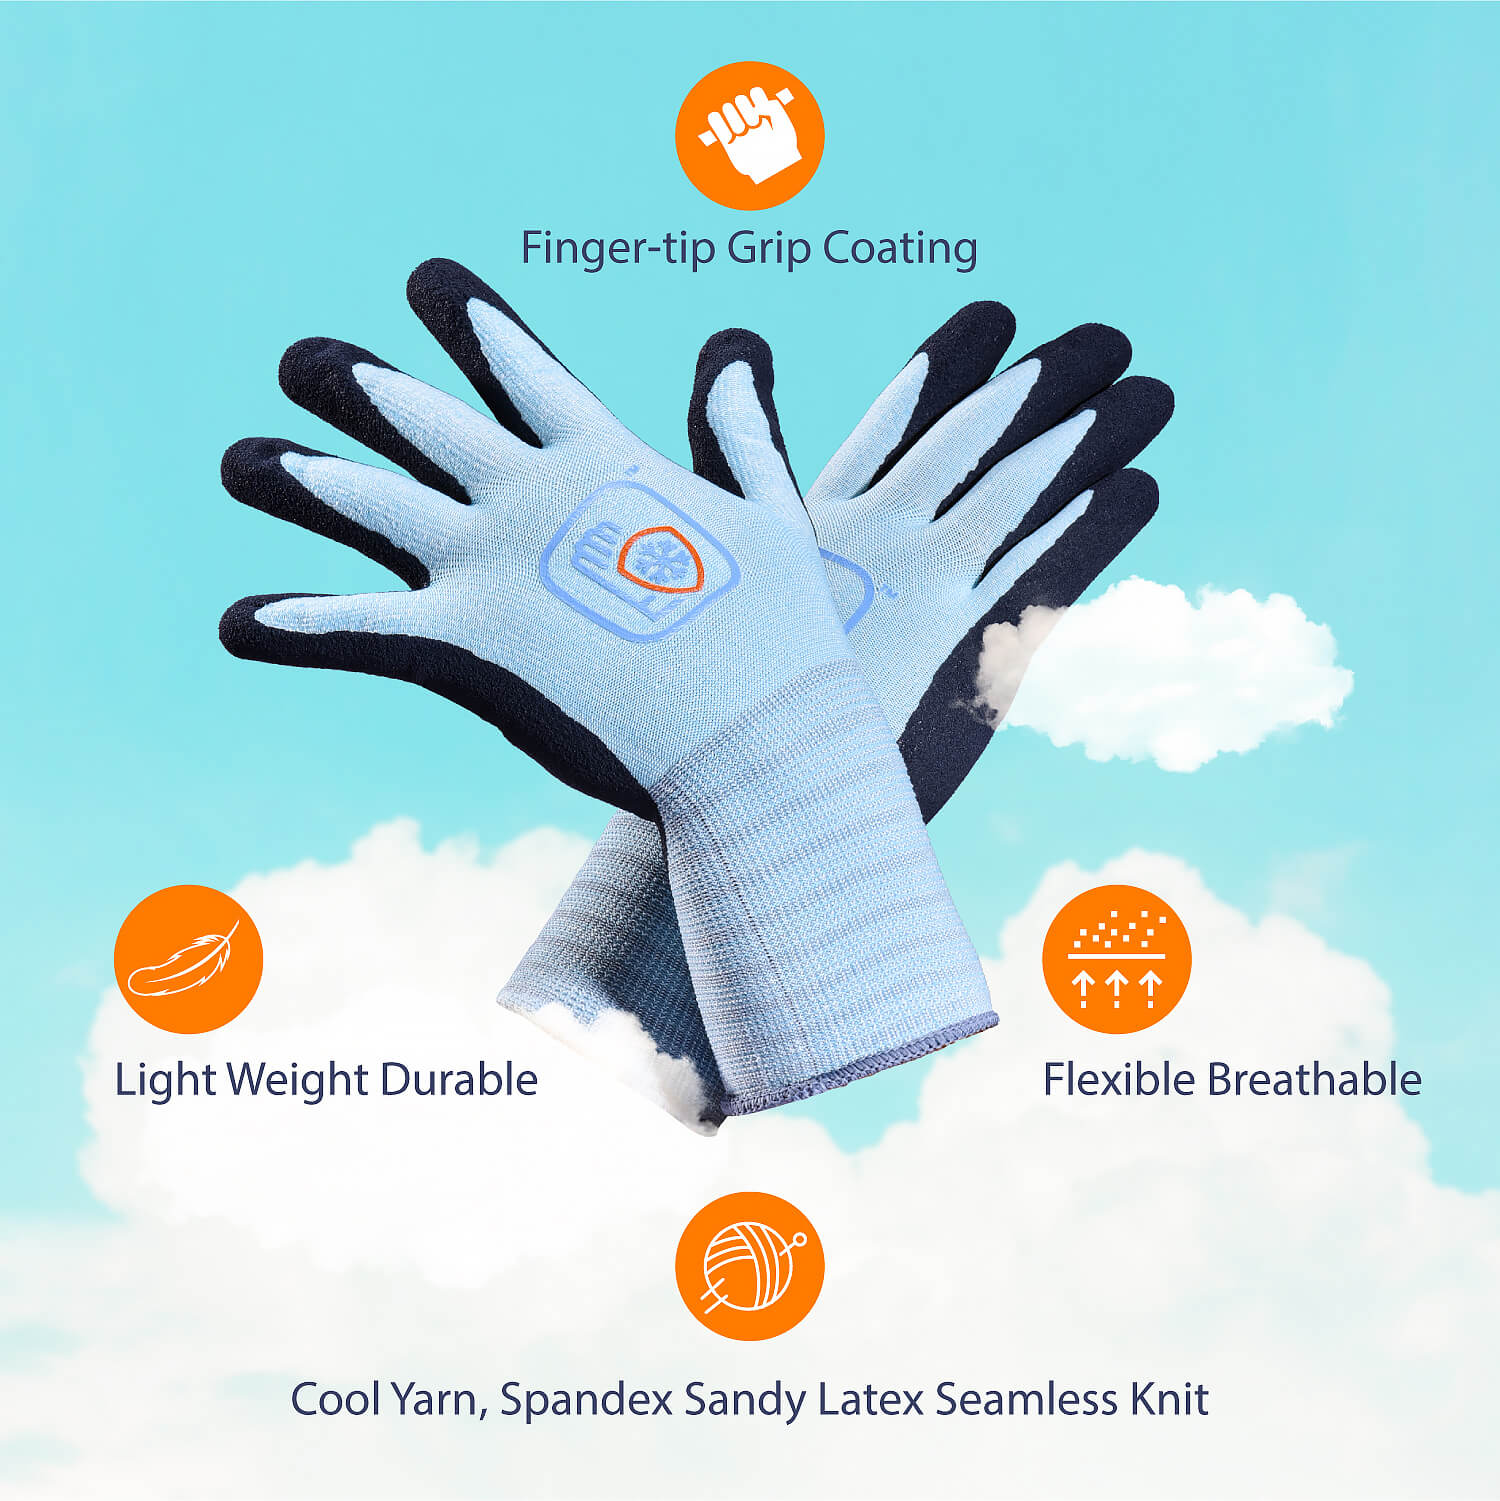 SAFEYEAR Safety Gloves for General Duty Work, Natural Latex Coated Work Gloves for Gardening,Construction,Warehouse 